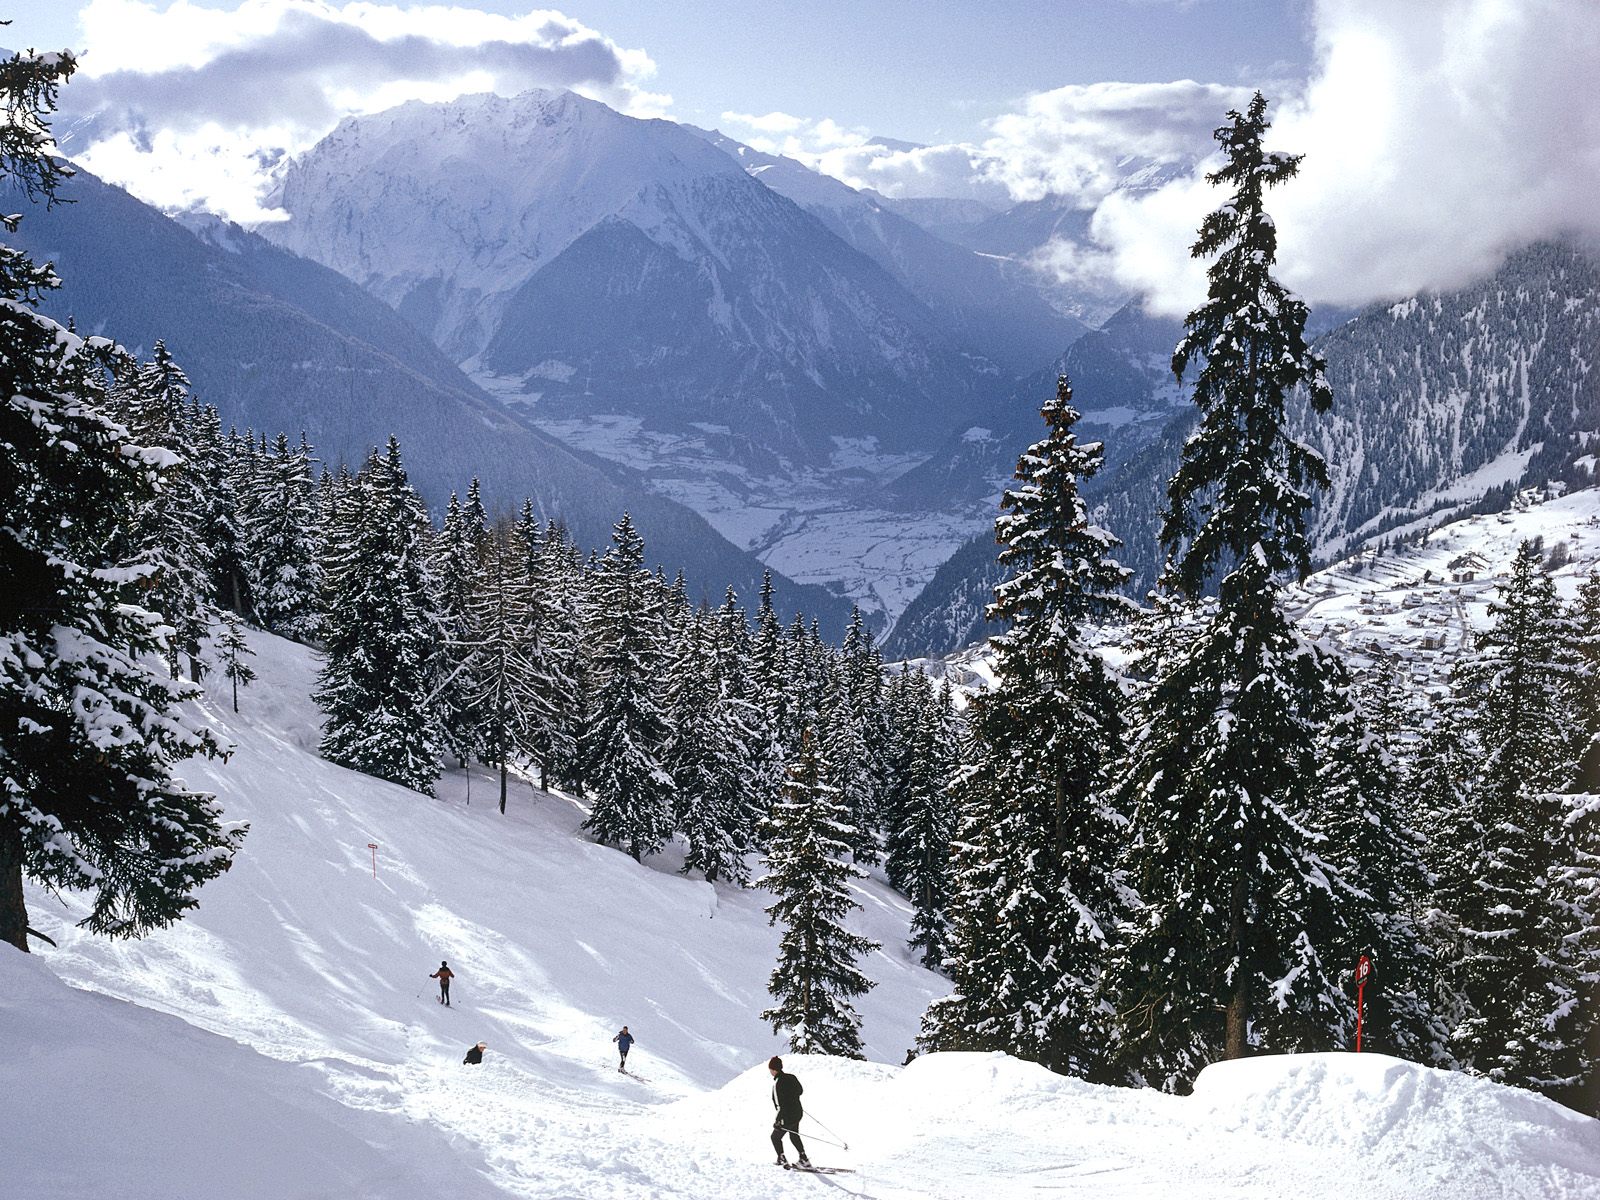 Skiing Swiss Alps wallpapers and images - wallpapers, pictures, photos